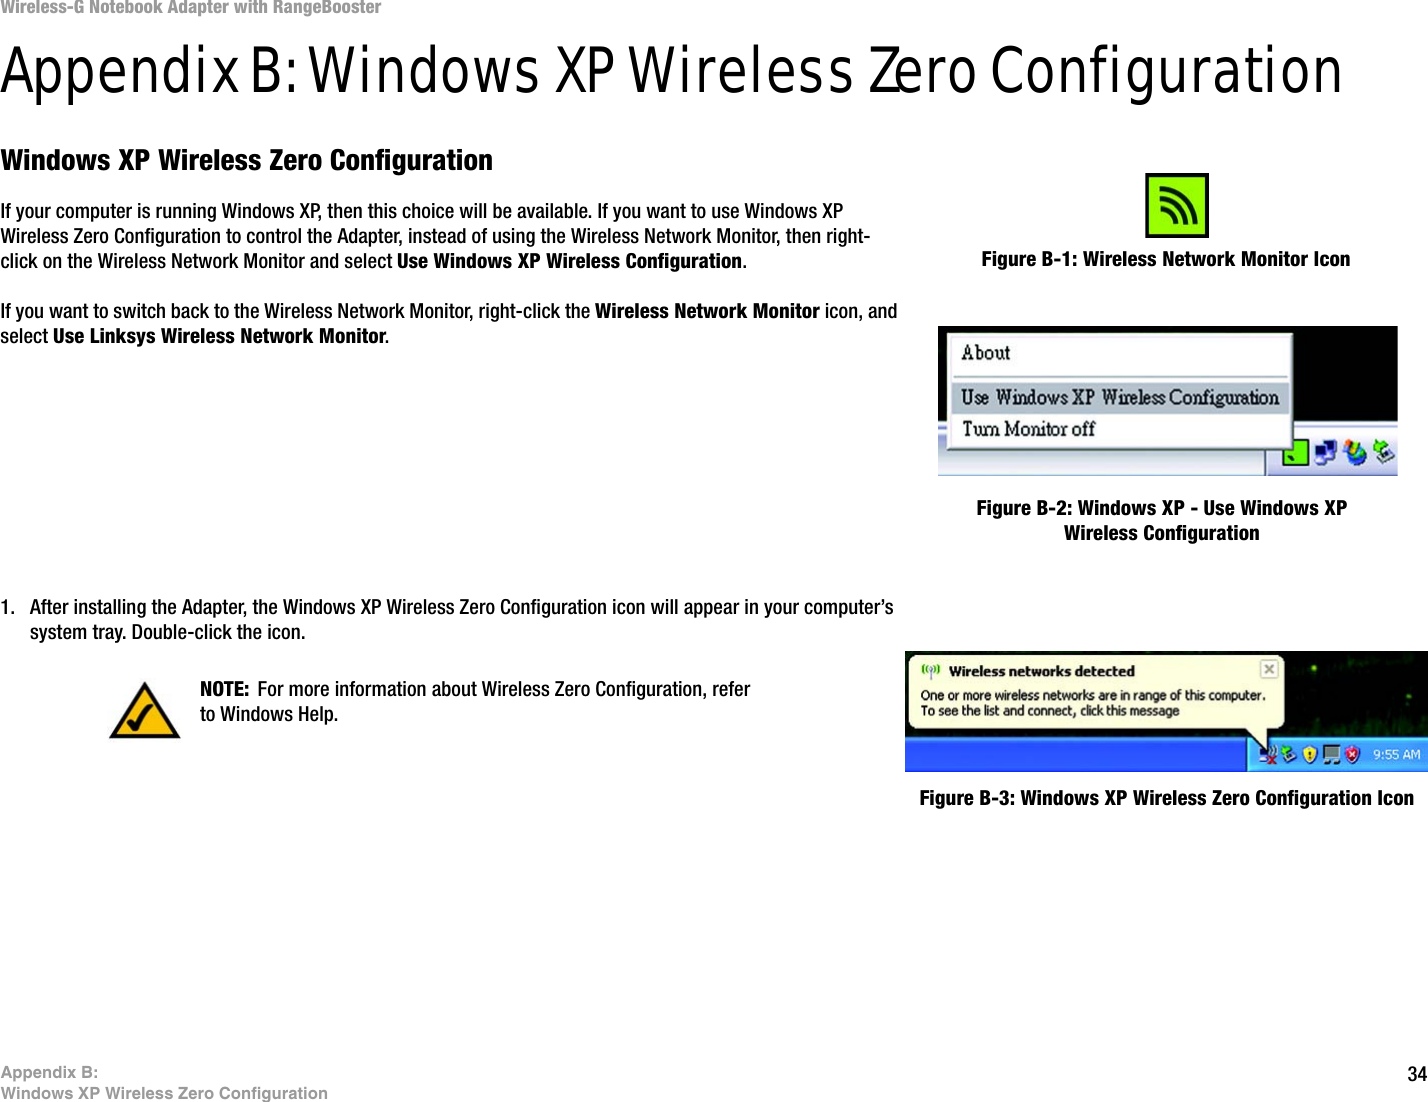 34Appendix B: Windows XP Wireless Zero ConfigurationWireless-G Notebook Adapter with RangeBoosterAppendix B: Windows XP Wireless Zero ConfigurationWindows XP Wireless Zero ConfigurationIf your computer is running Windows XP, then this choice will be available. If you want to use Windows XP Wireless Zero Configuration to control the Adapter, instead of using the Wireless Network Monitor, then right-click on the Wireless Network Monitor and select Use Windows XP Wireless Configuration. If you want to switch back to the Wireless Network Monitor, right-click the Wireless Network Monitor icon, and select Use Linksys Wireless Network Monitor.1. After installing the Adapter, the Windows XP Wireless Zero Configuration icon will appear in your computer’s system tray. Double-click the icon. Figure B-1: Wireless Network Monitor IconFigure B-2: Windows XP - Use Windows XP Wireless ConfigurationNOTE: For more information about Wireless Zero Configuration, refer to Windows Help.Figure B-3: Windows XP Wireless Zero Configuration Icon